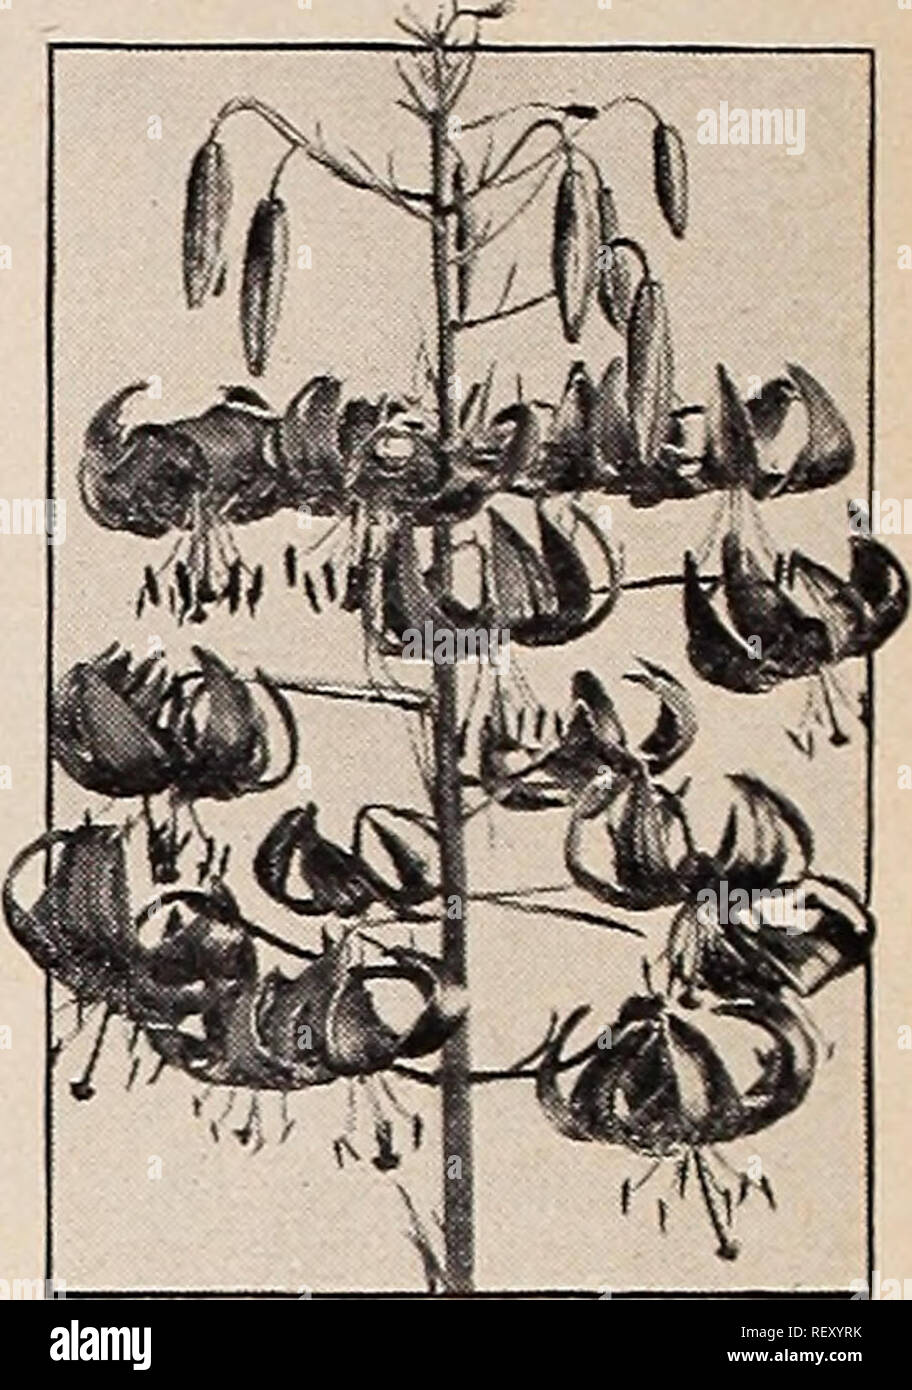 . Dreer's wholesale catalog for florists and market gardeners : autumn 1940 edition. Bulbs (Plants) Catalogs; Vegetables Seeds Catalogs; Flowers Seeds Catalogs; Nurseries (Horticulture) Catalogs; Gardening Equipment and supplies Catalogs. Helenium Double Hollyhock Lilium tenuifolium Helenium—Helen's Flower Strong-g^rowing hardy perennials giving an enormous crop of flowers in late summer. Tr. pkt. Vi Oz. Autumnale Superbum. Golden yellow flowers; 5 to 6 ft $0 50 $1 00 Blverton Oem. Old gold changing to Wallflower red 50 1 00 Helianthemum—Rock or Sun Rose Uutabile, exceedingly pretty, low-growi Stock Photo